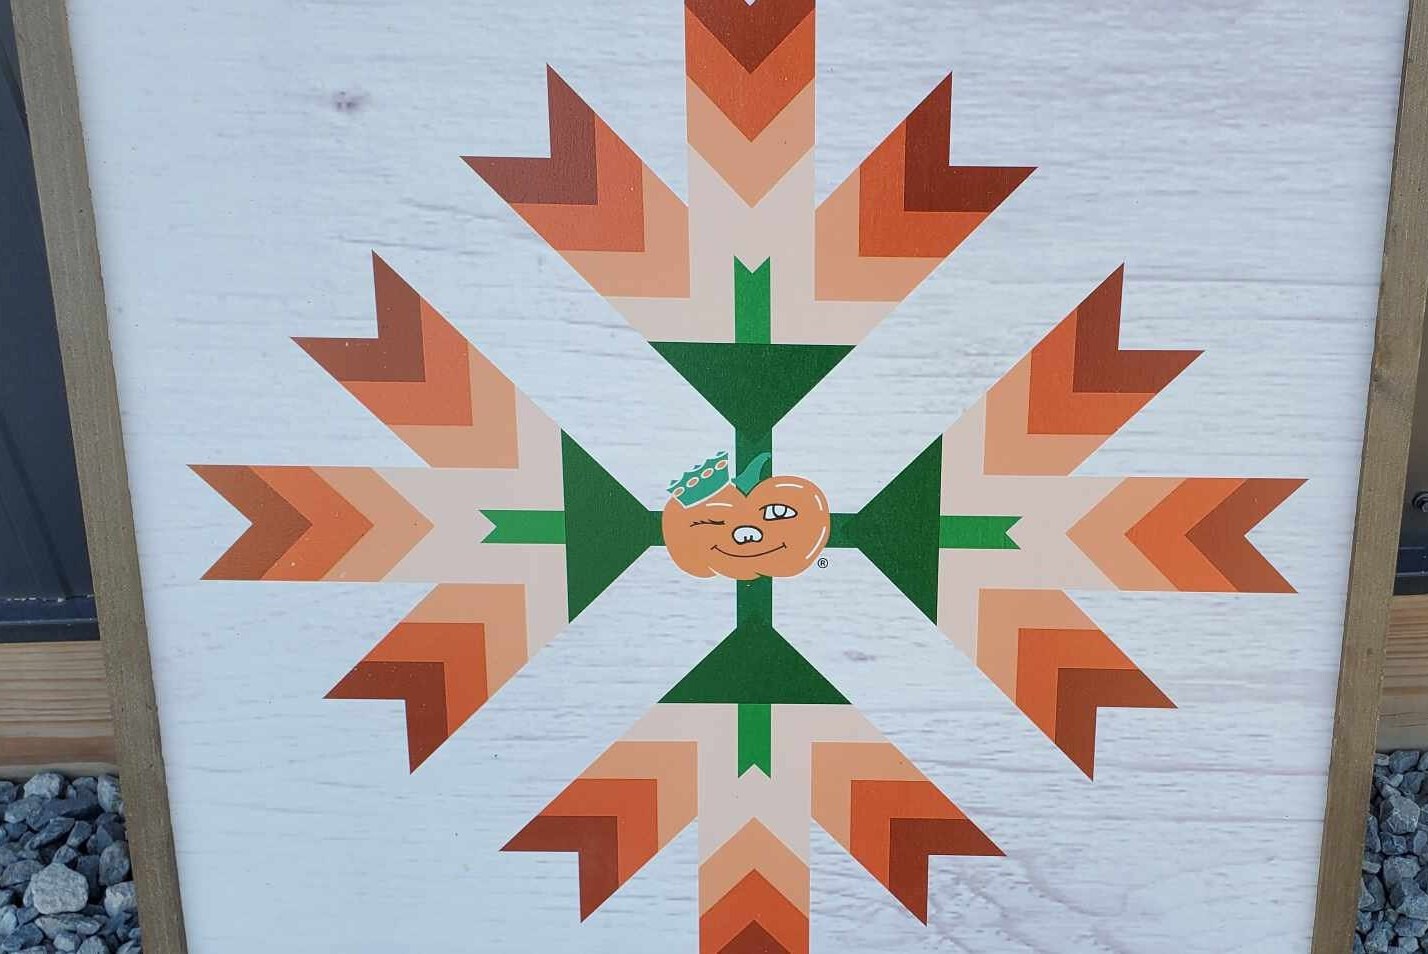 Winky Pumpkin Ohio Gourd Small Town Barn Quilt Mascot Farm Decor Orange and Green White Wash Made Wood Outdoor Hang in Garden Star Flower